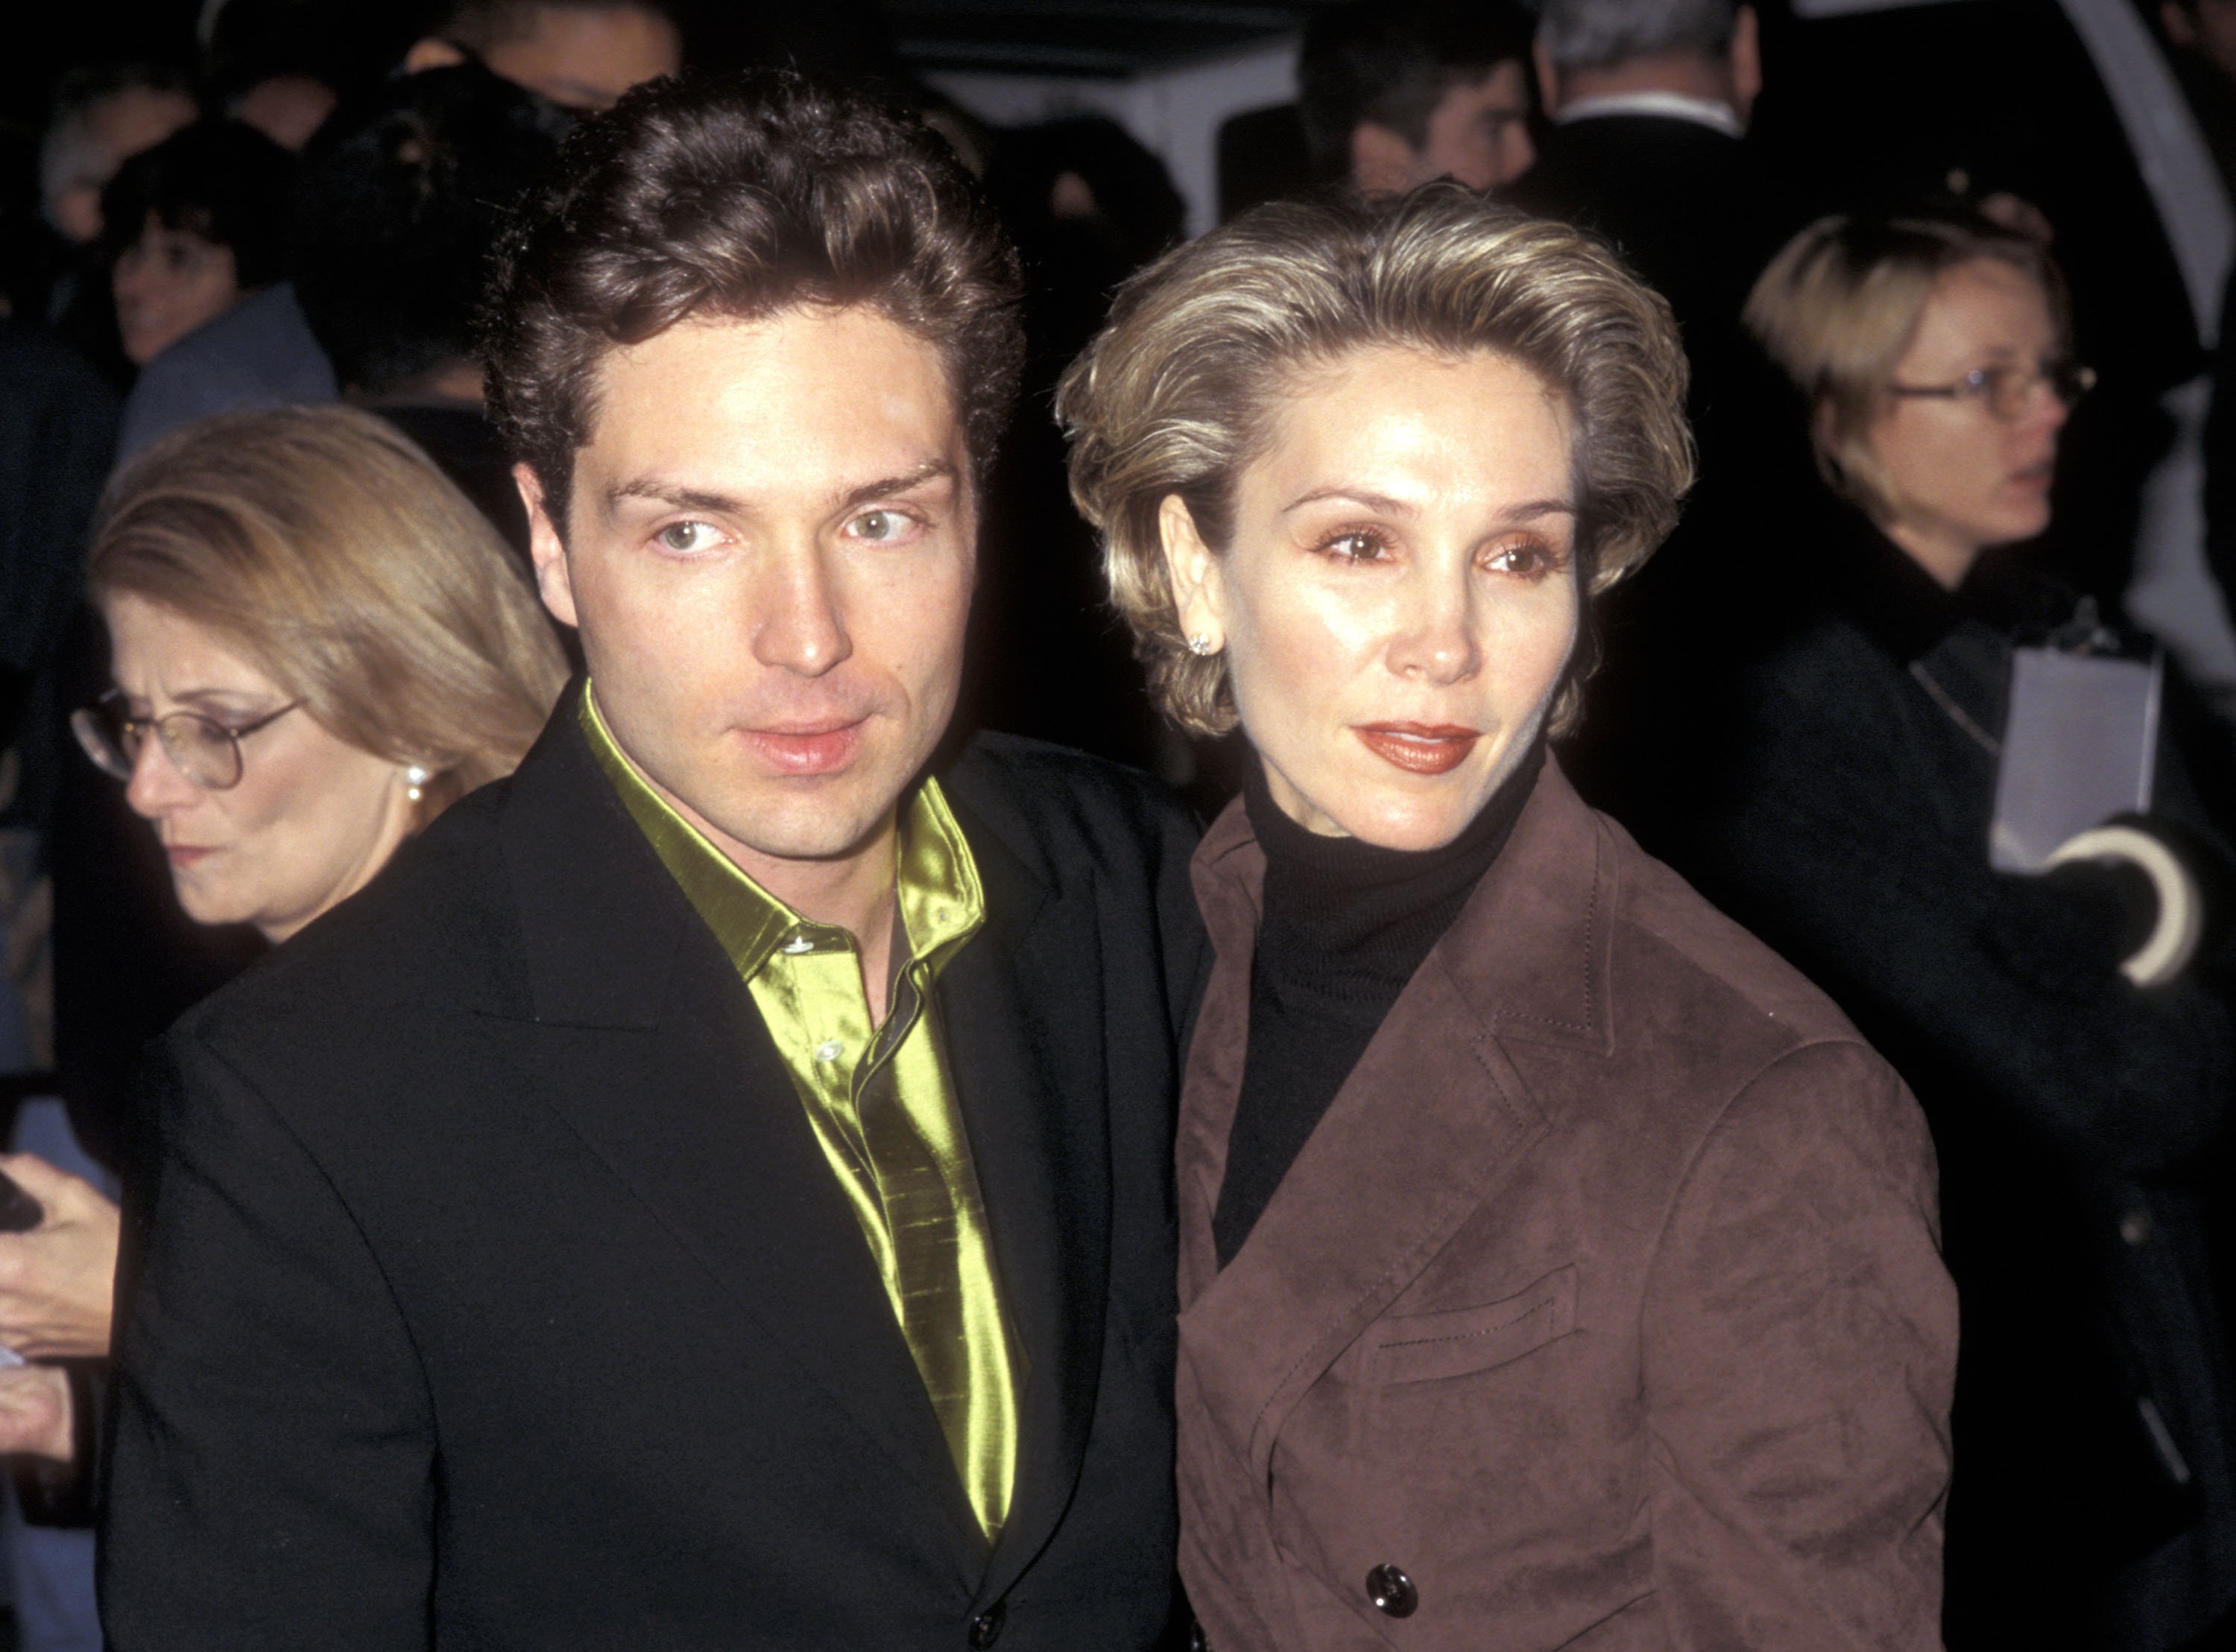  Richard Marx and actress Cynthia Rhodes attend The Mirror Has Two Face New York City Premiere on November 10, 1996 | Photo: GettyImages